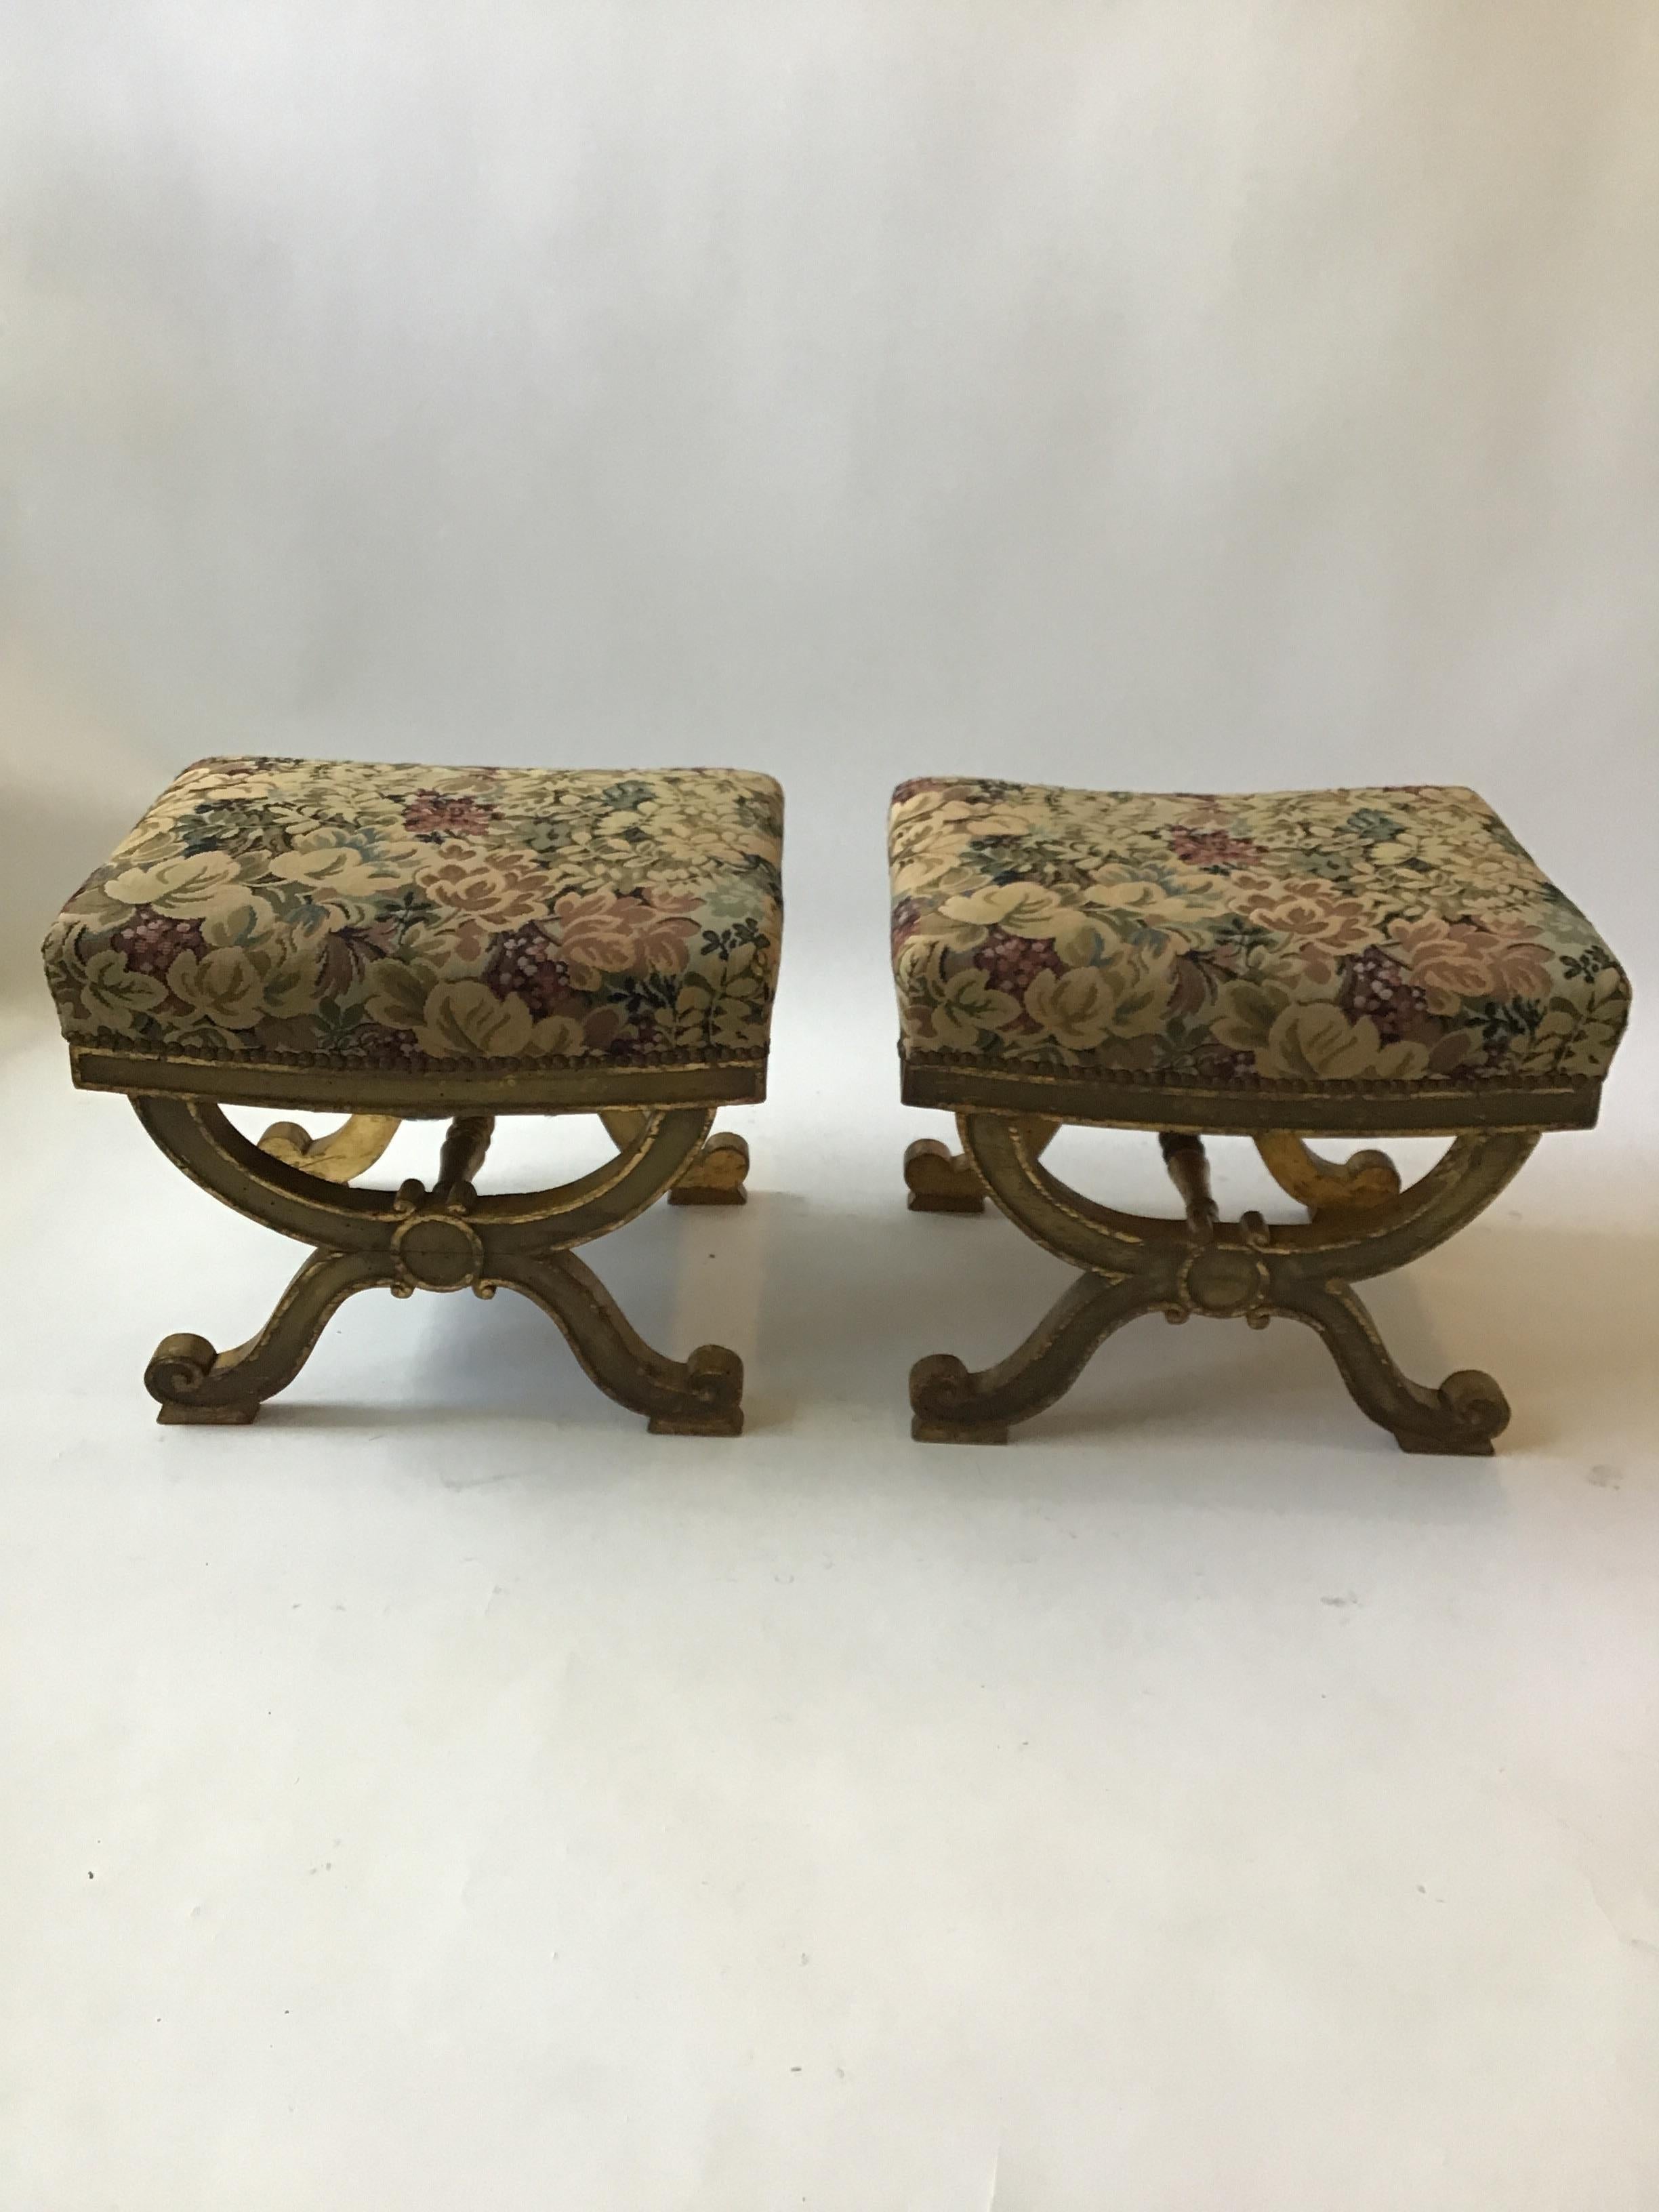 Pair of 1890s Italian classical giltwood benches. Needs reupholstering. From a Southampton estate.